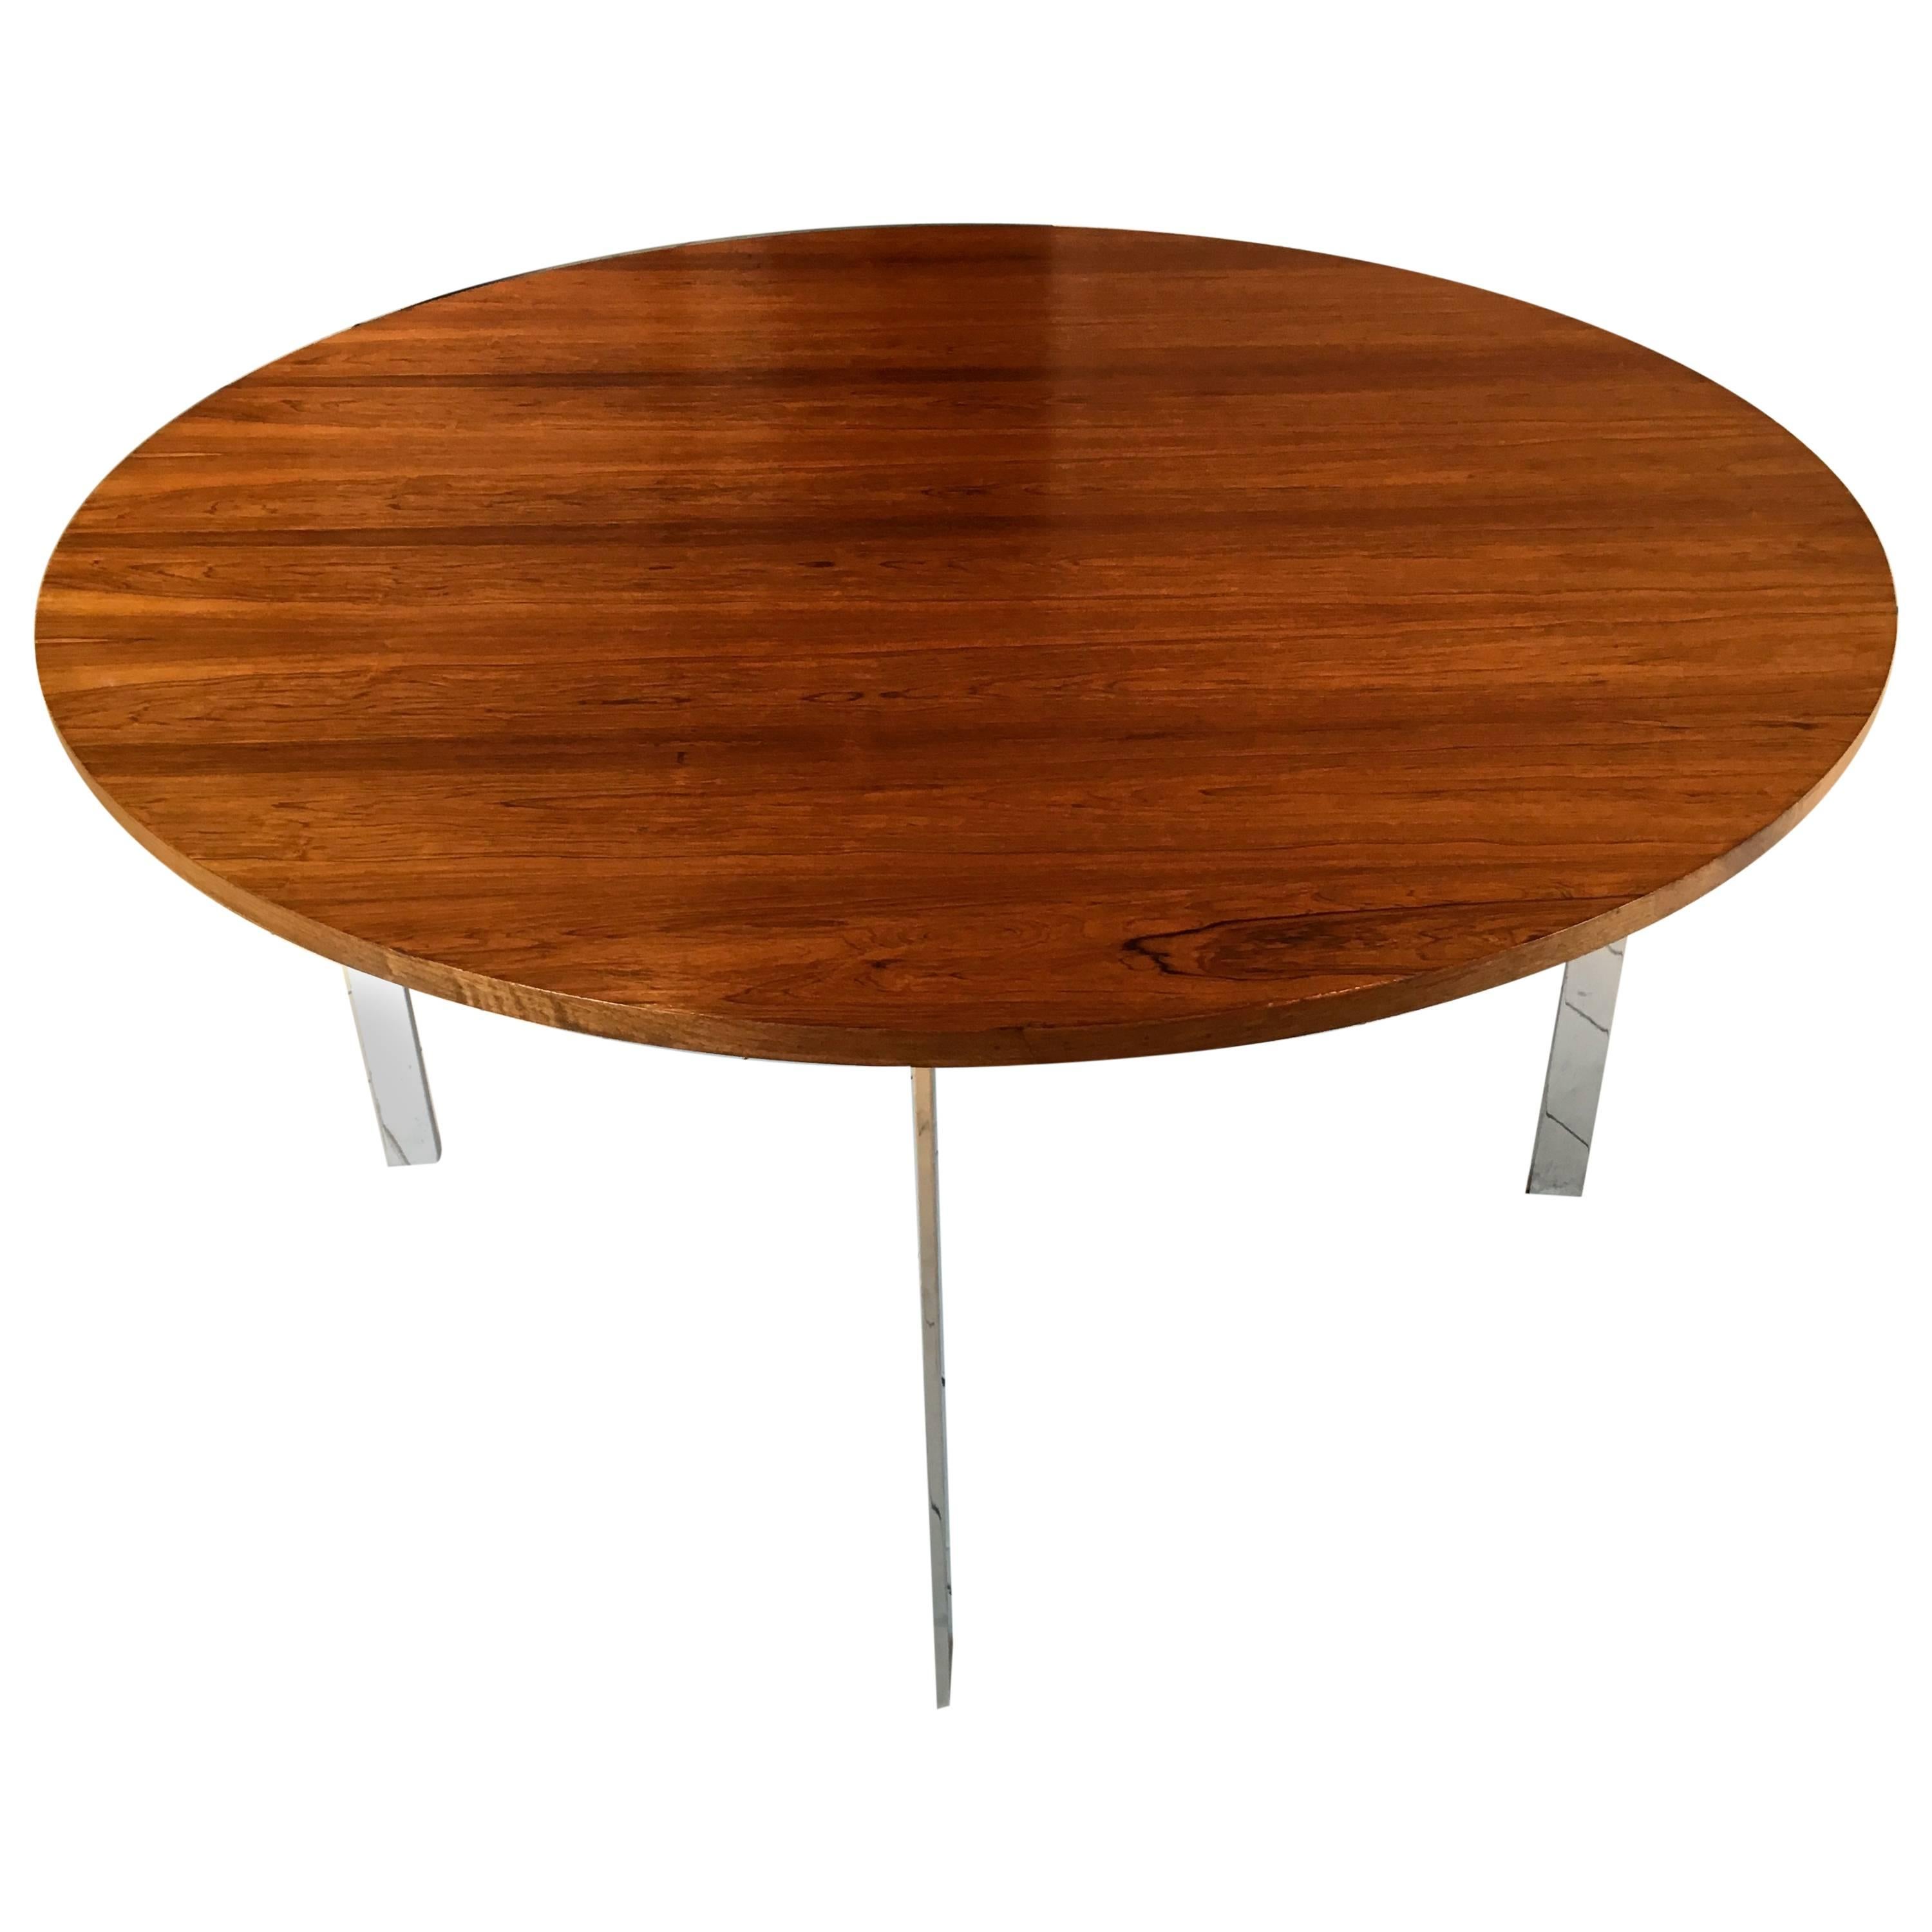 Merrow Associates Rosewood and Chromium-Plated Dining Table